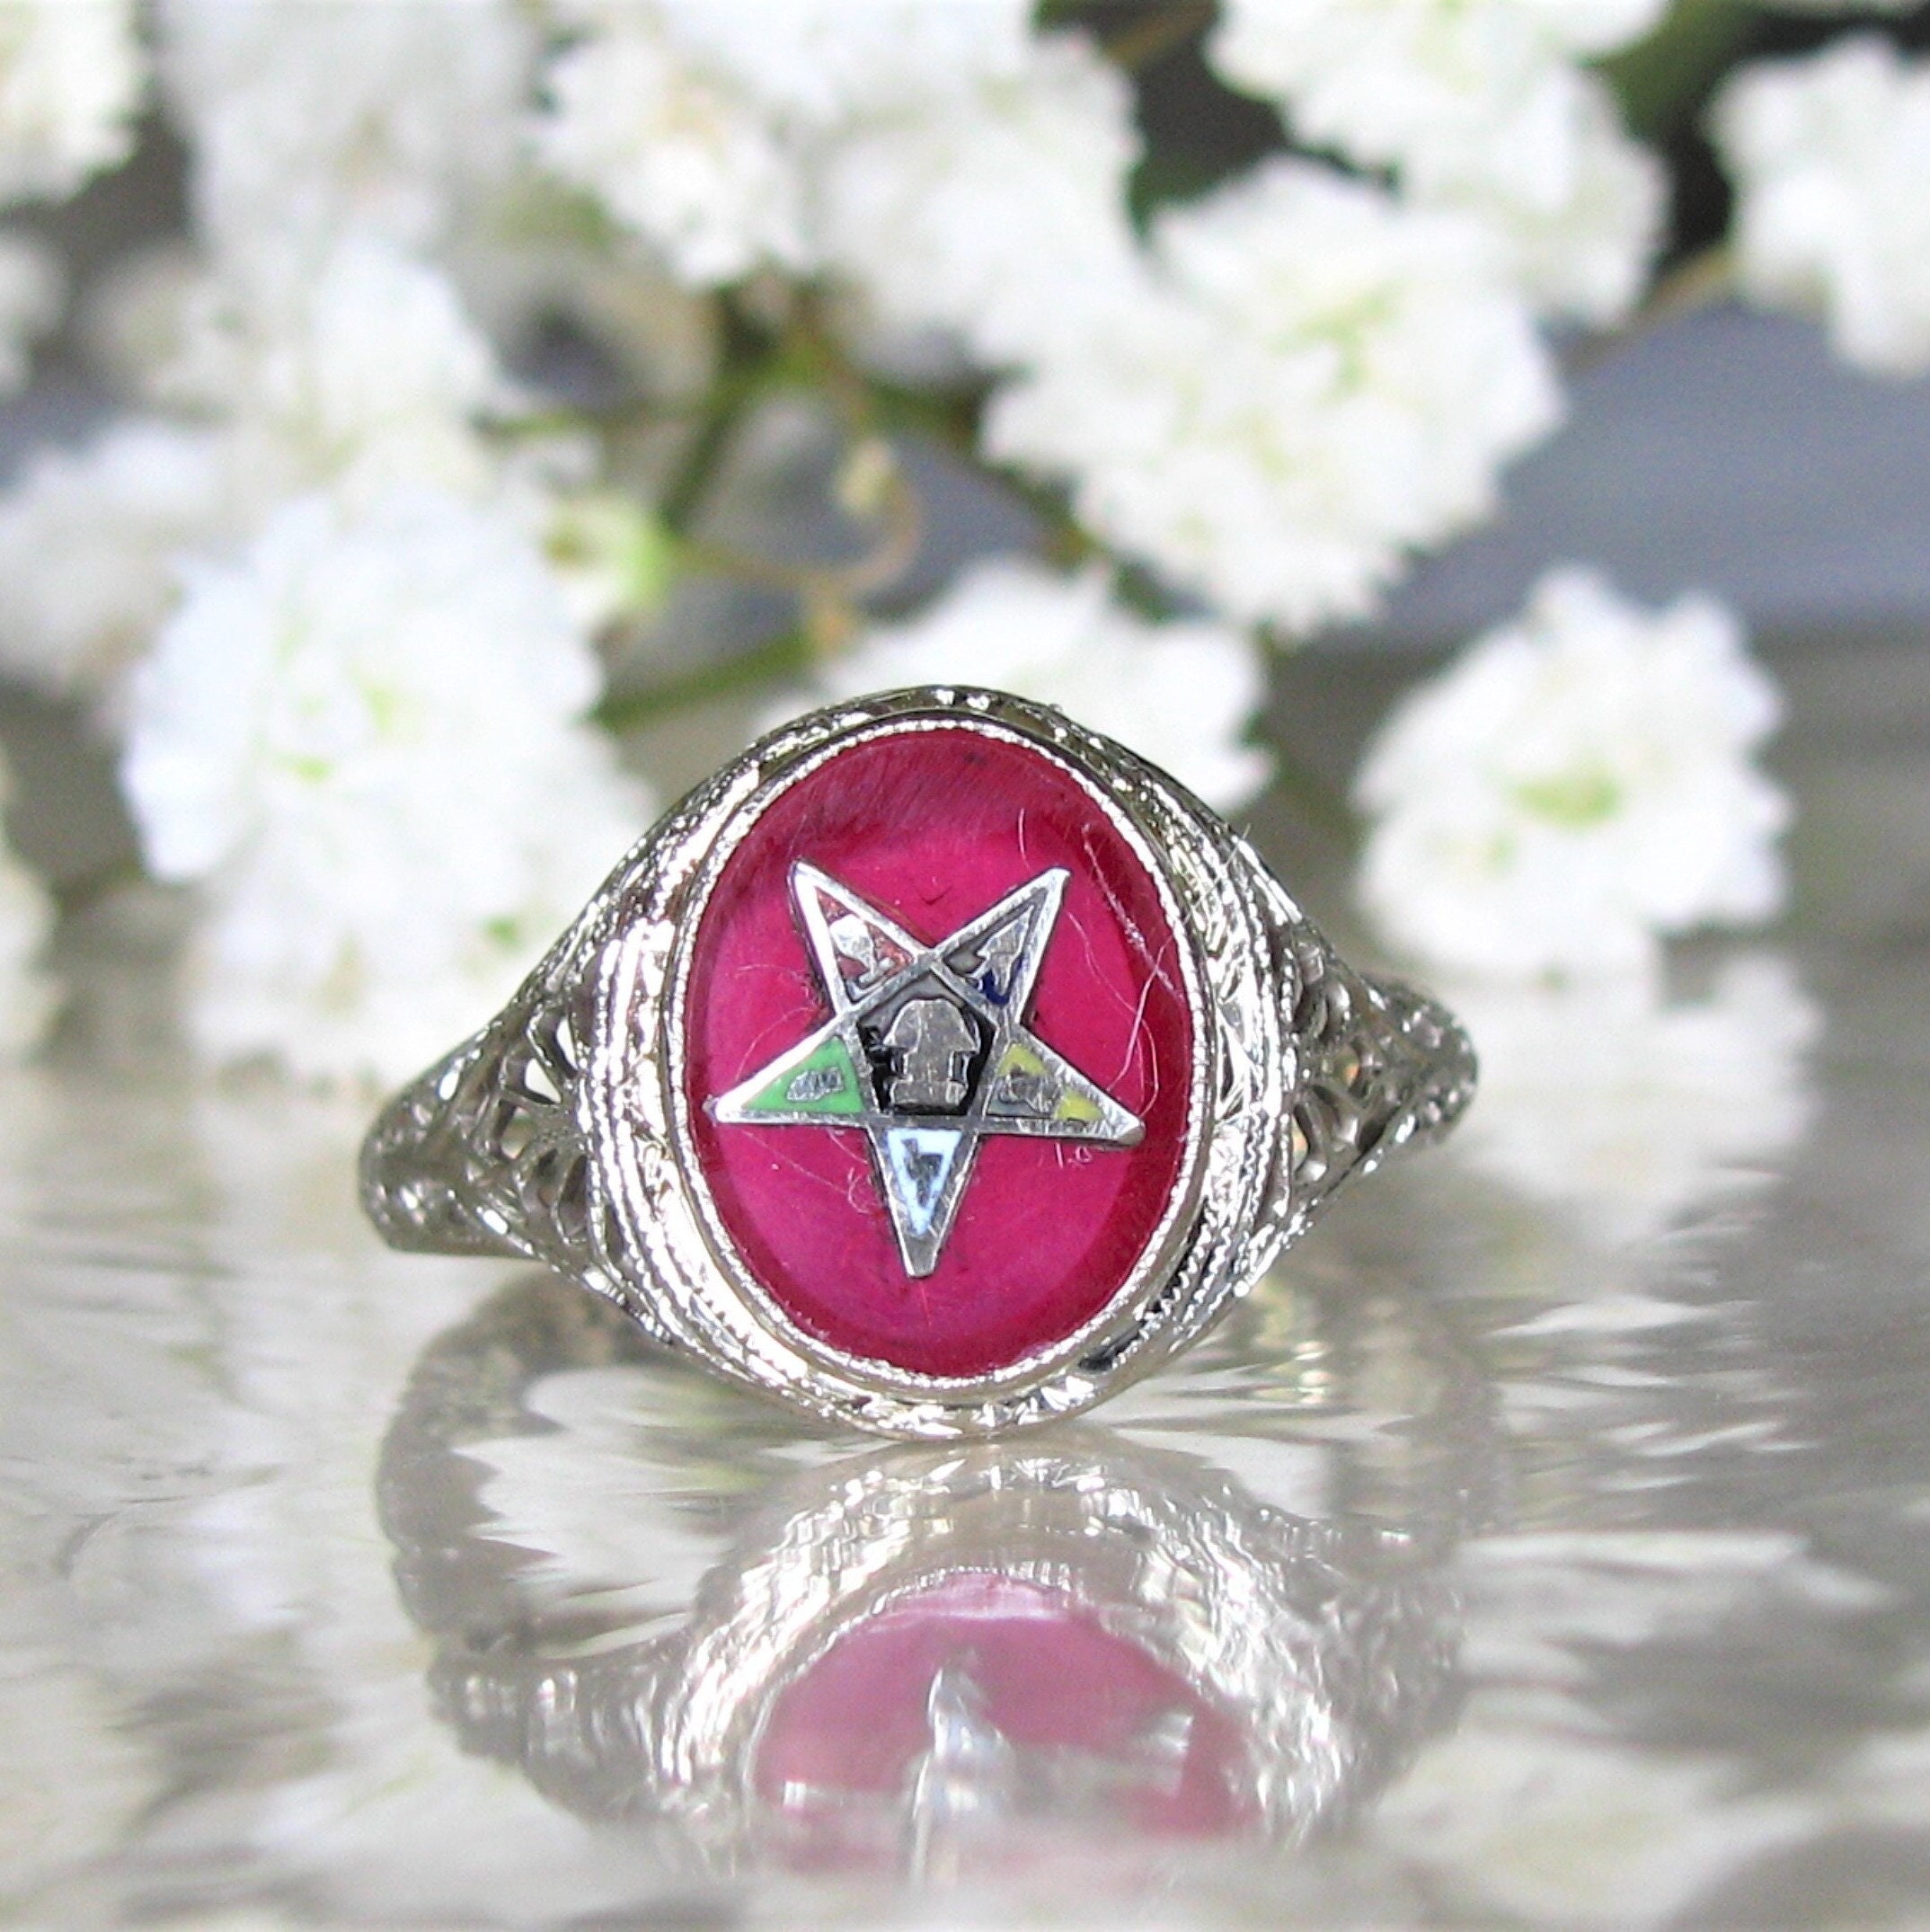 Colour Blossom Mini Star Ring, Pink Gold, White Mother-Of-Pearl